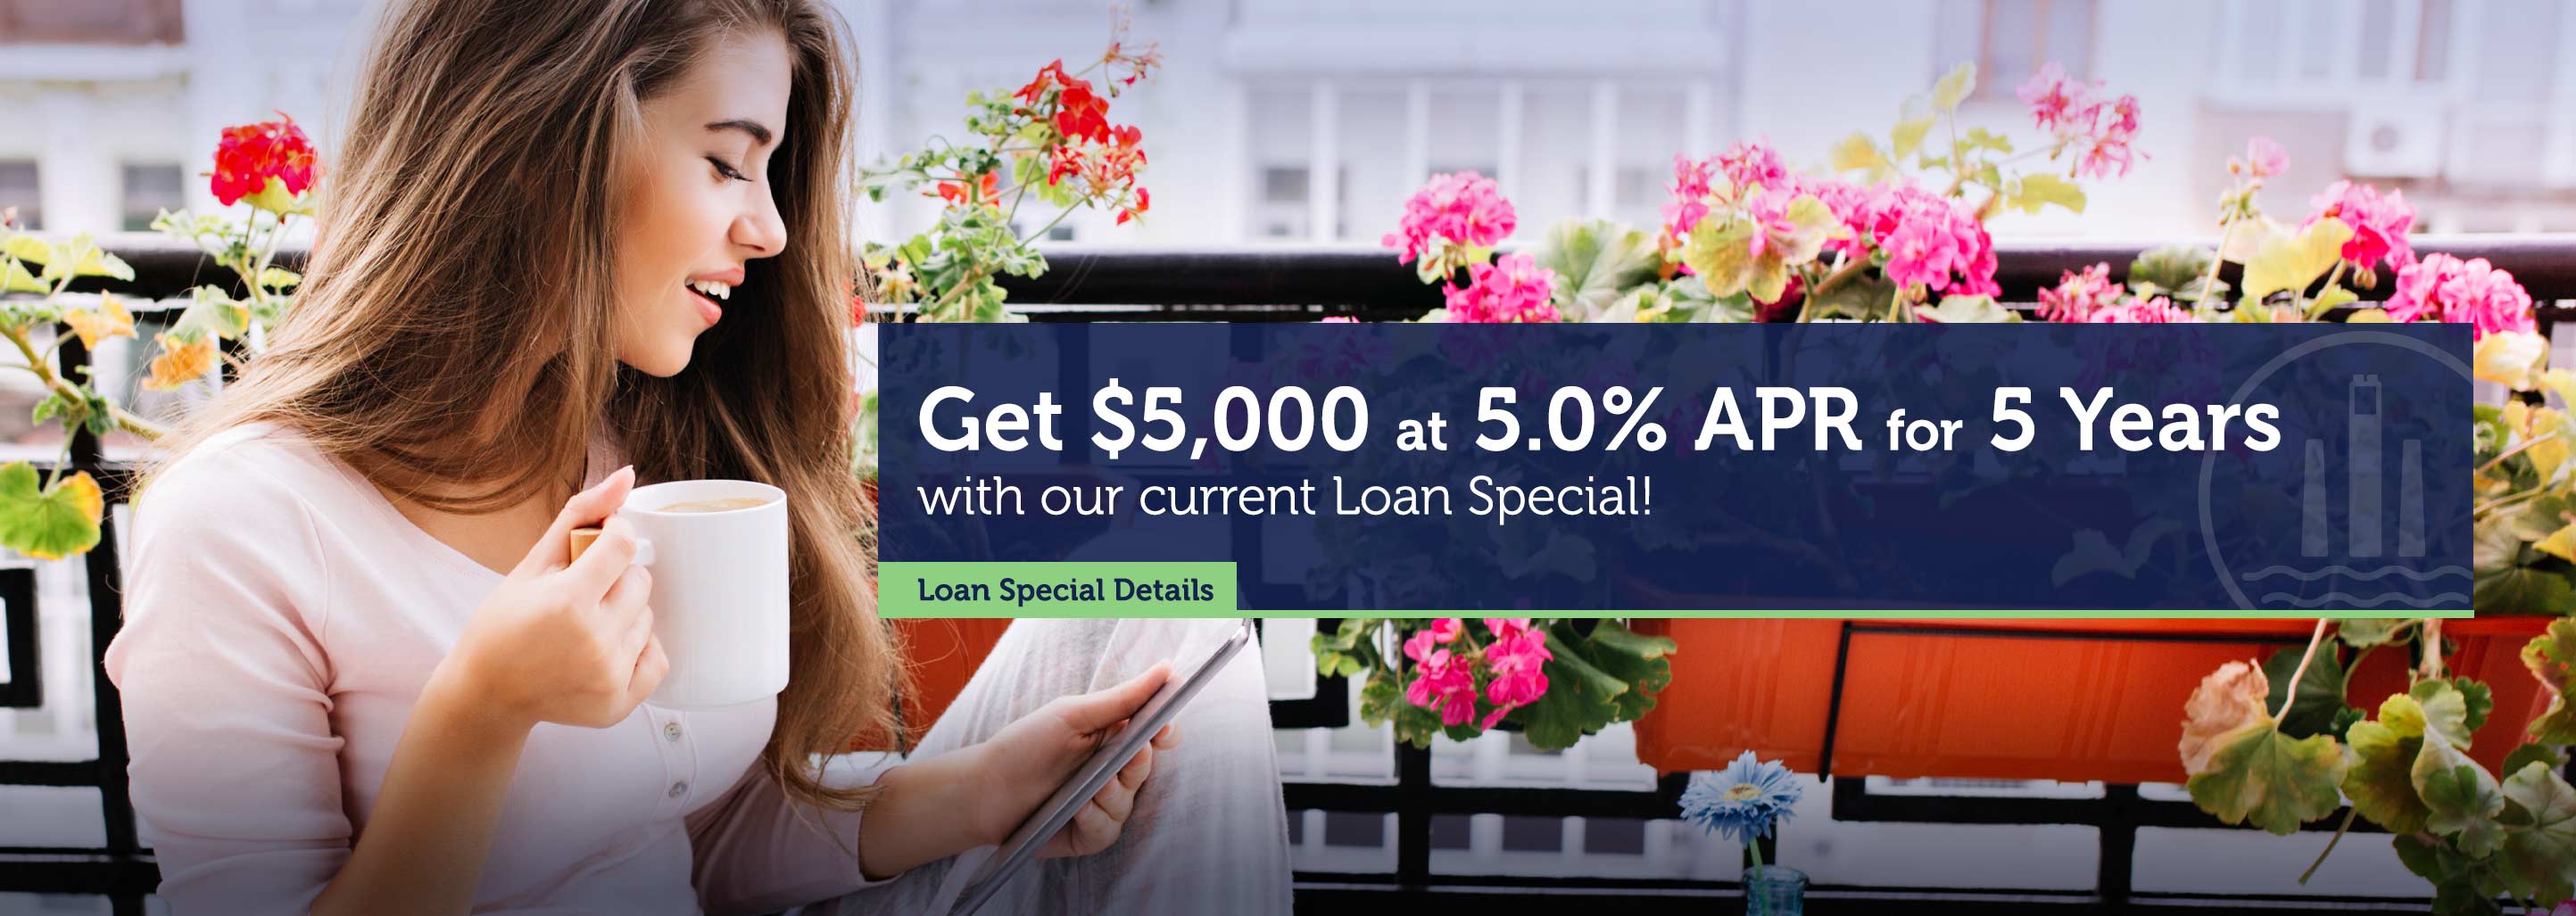 Get $5,000 at 5.0% APR for 5 Years with our current Loan Special! Get Loan Special Details.